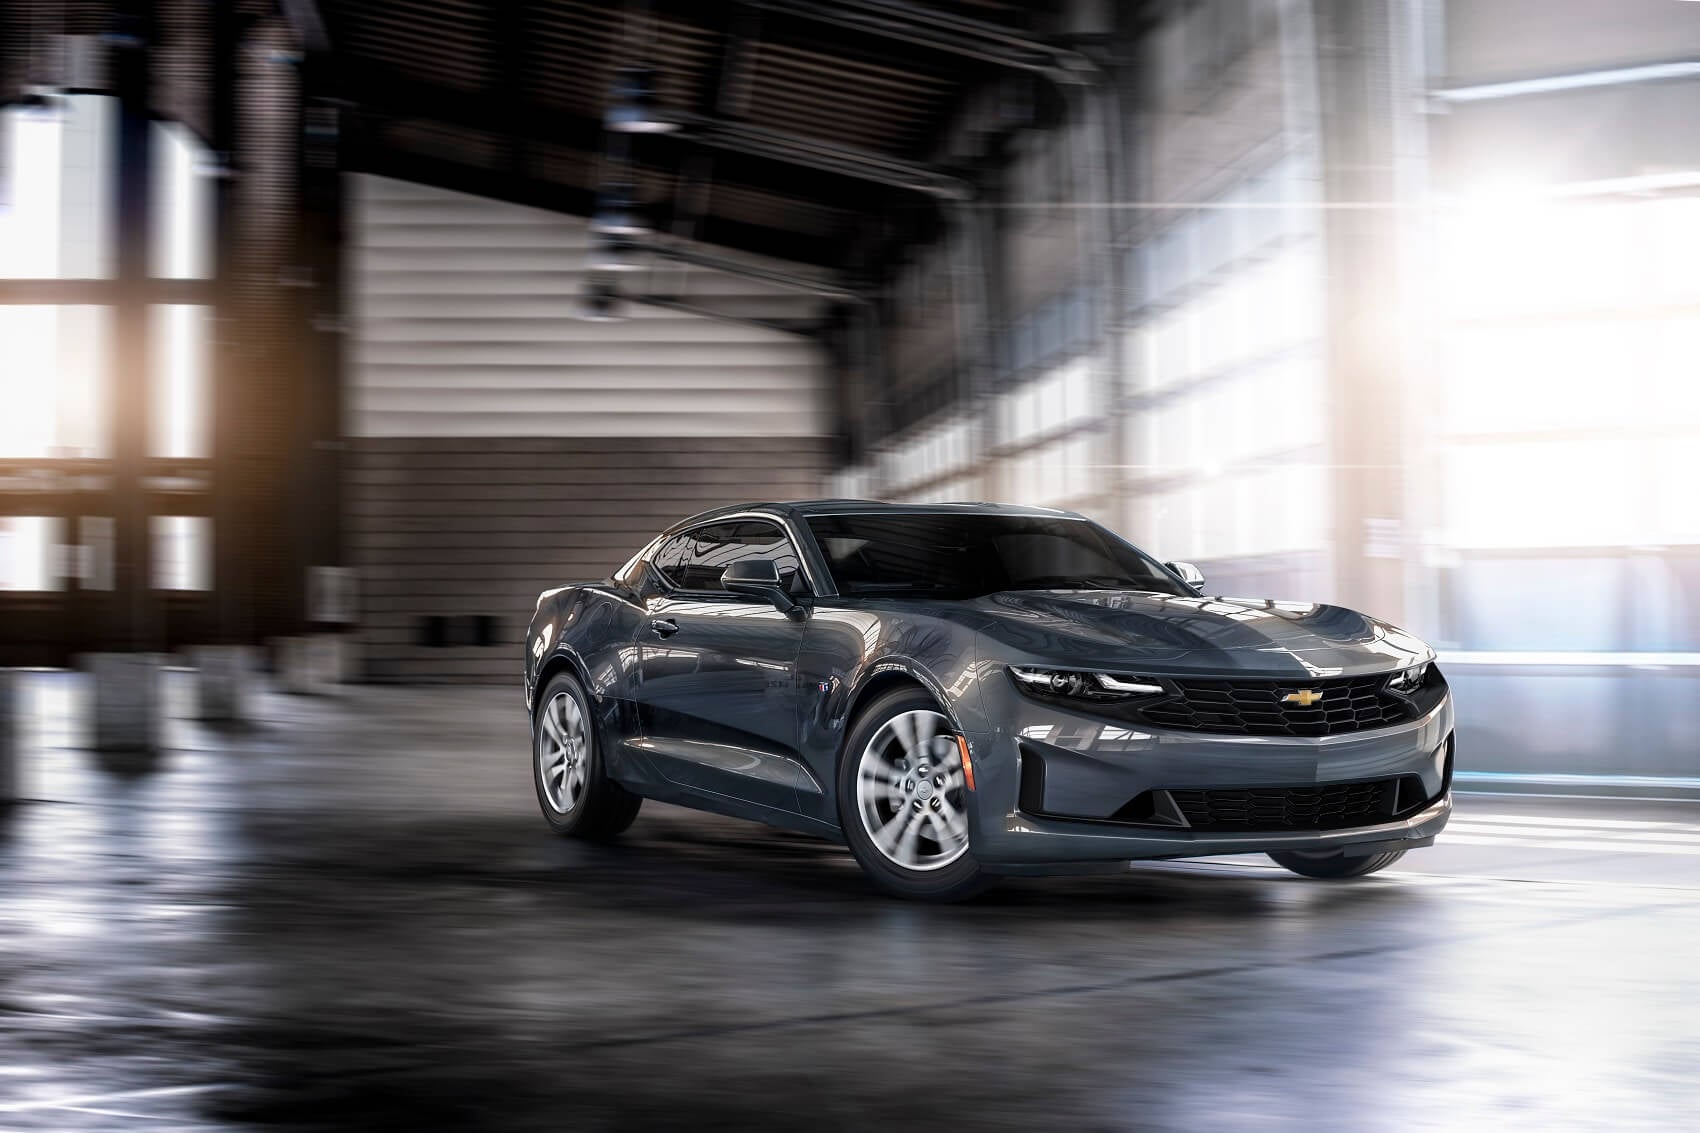 Certified Pre-Owned Chevy Camero near Dearborn Heights MI